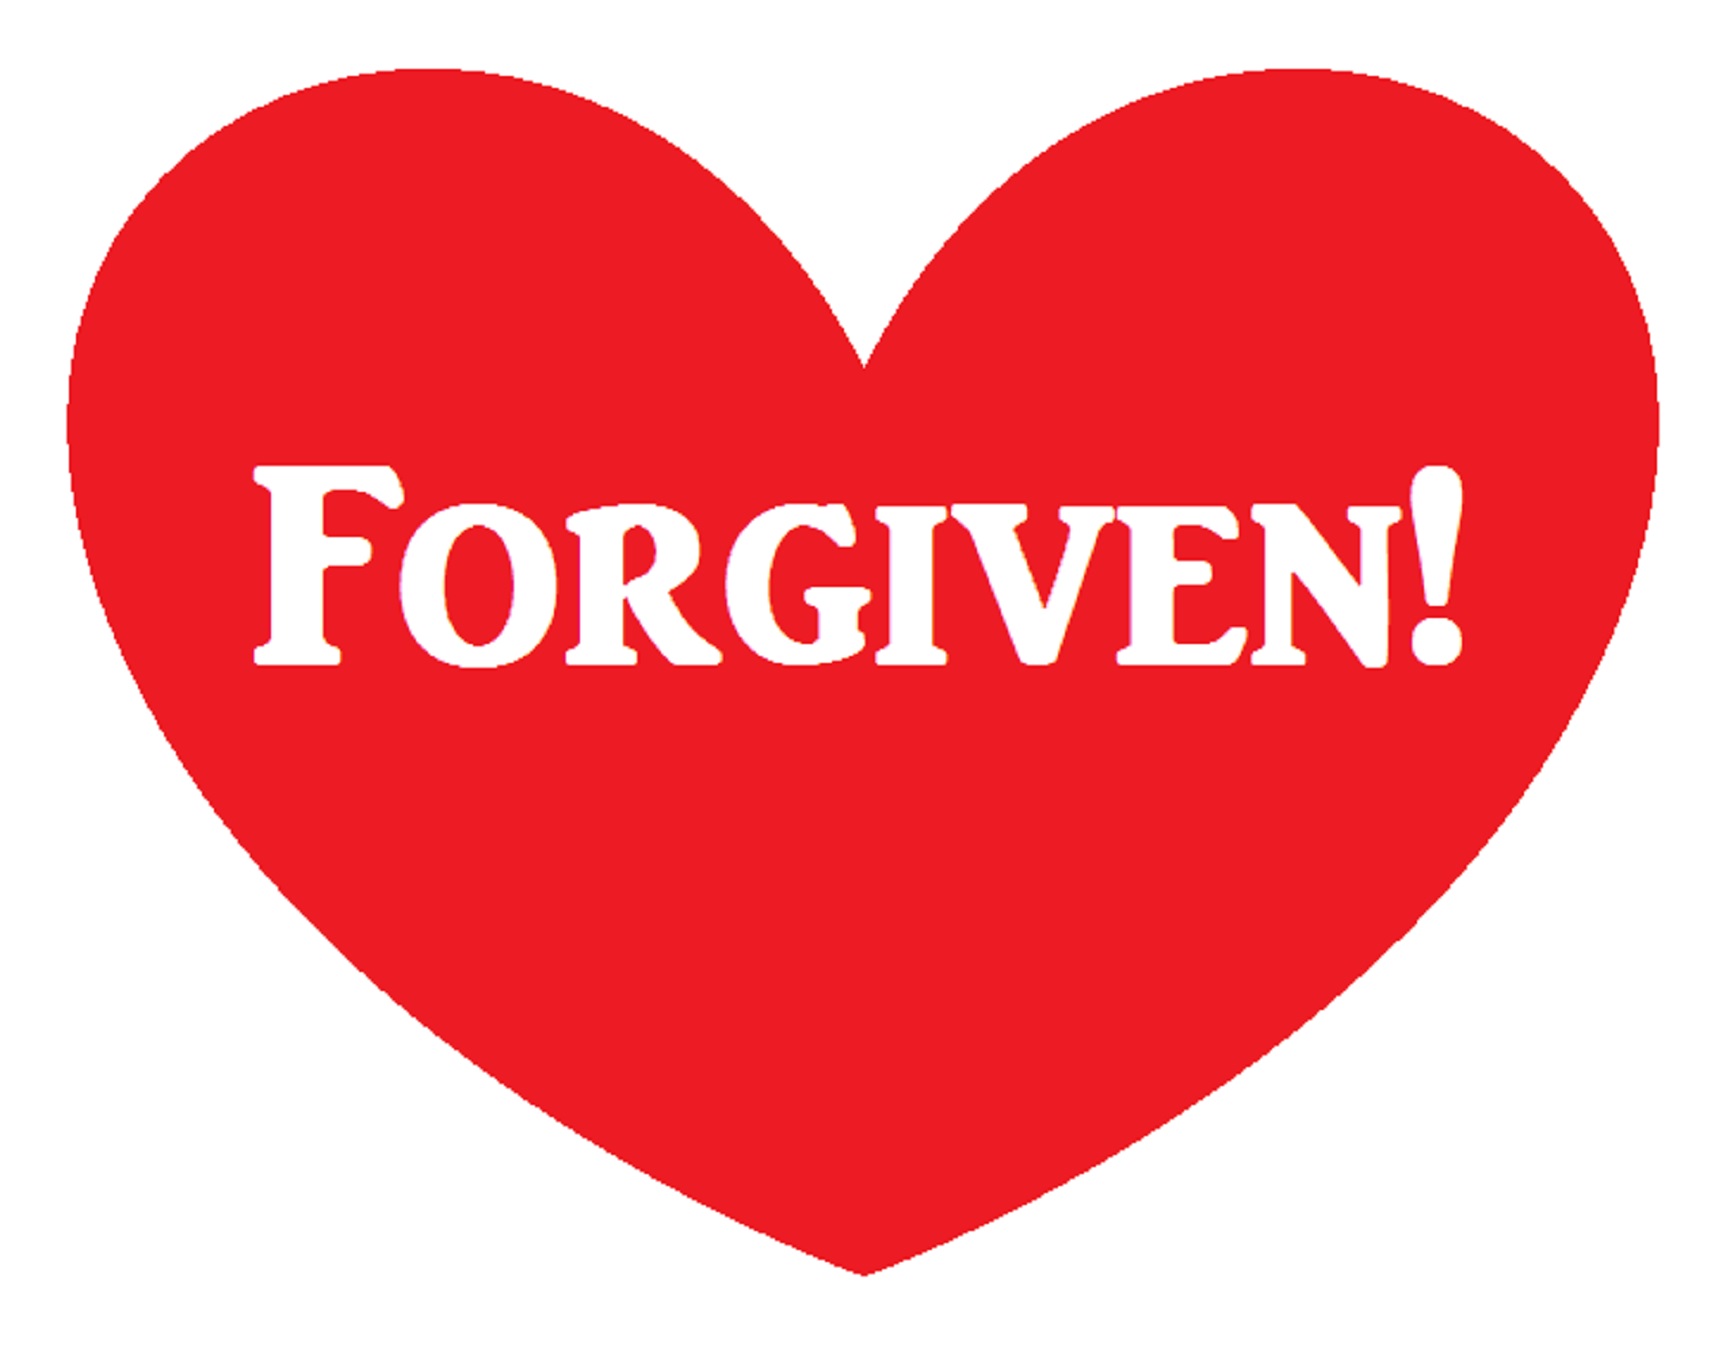 Forgiven Created by me with Microsoft Paint